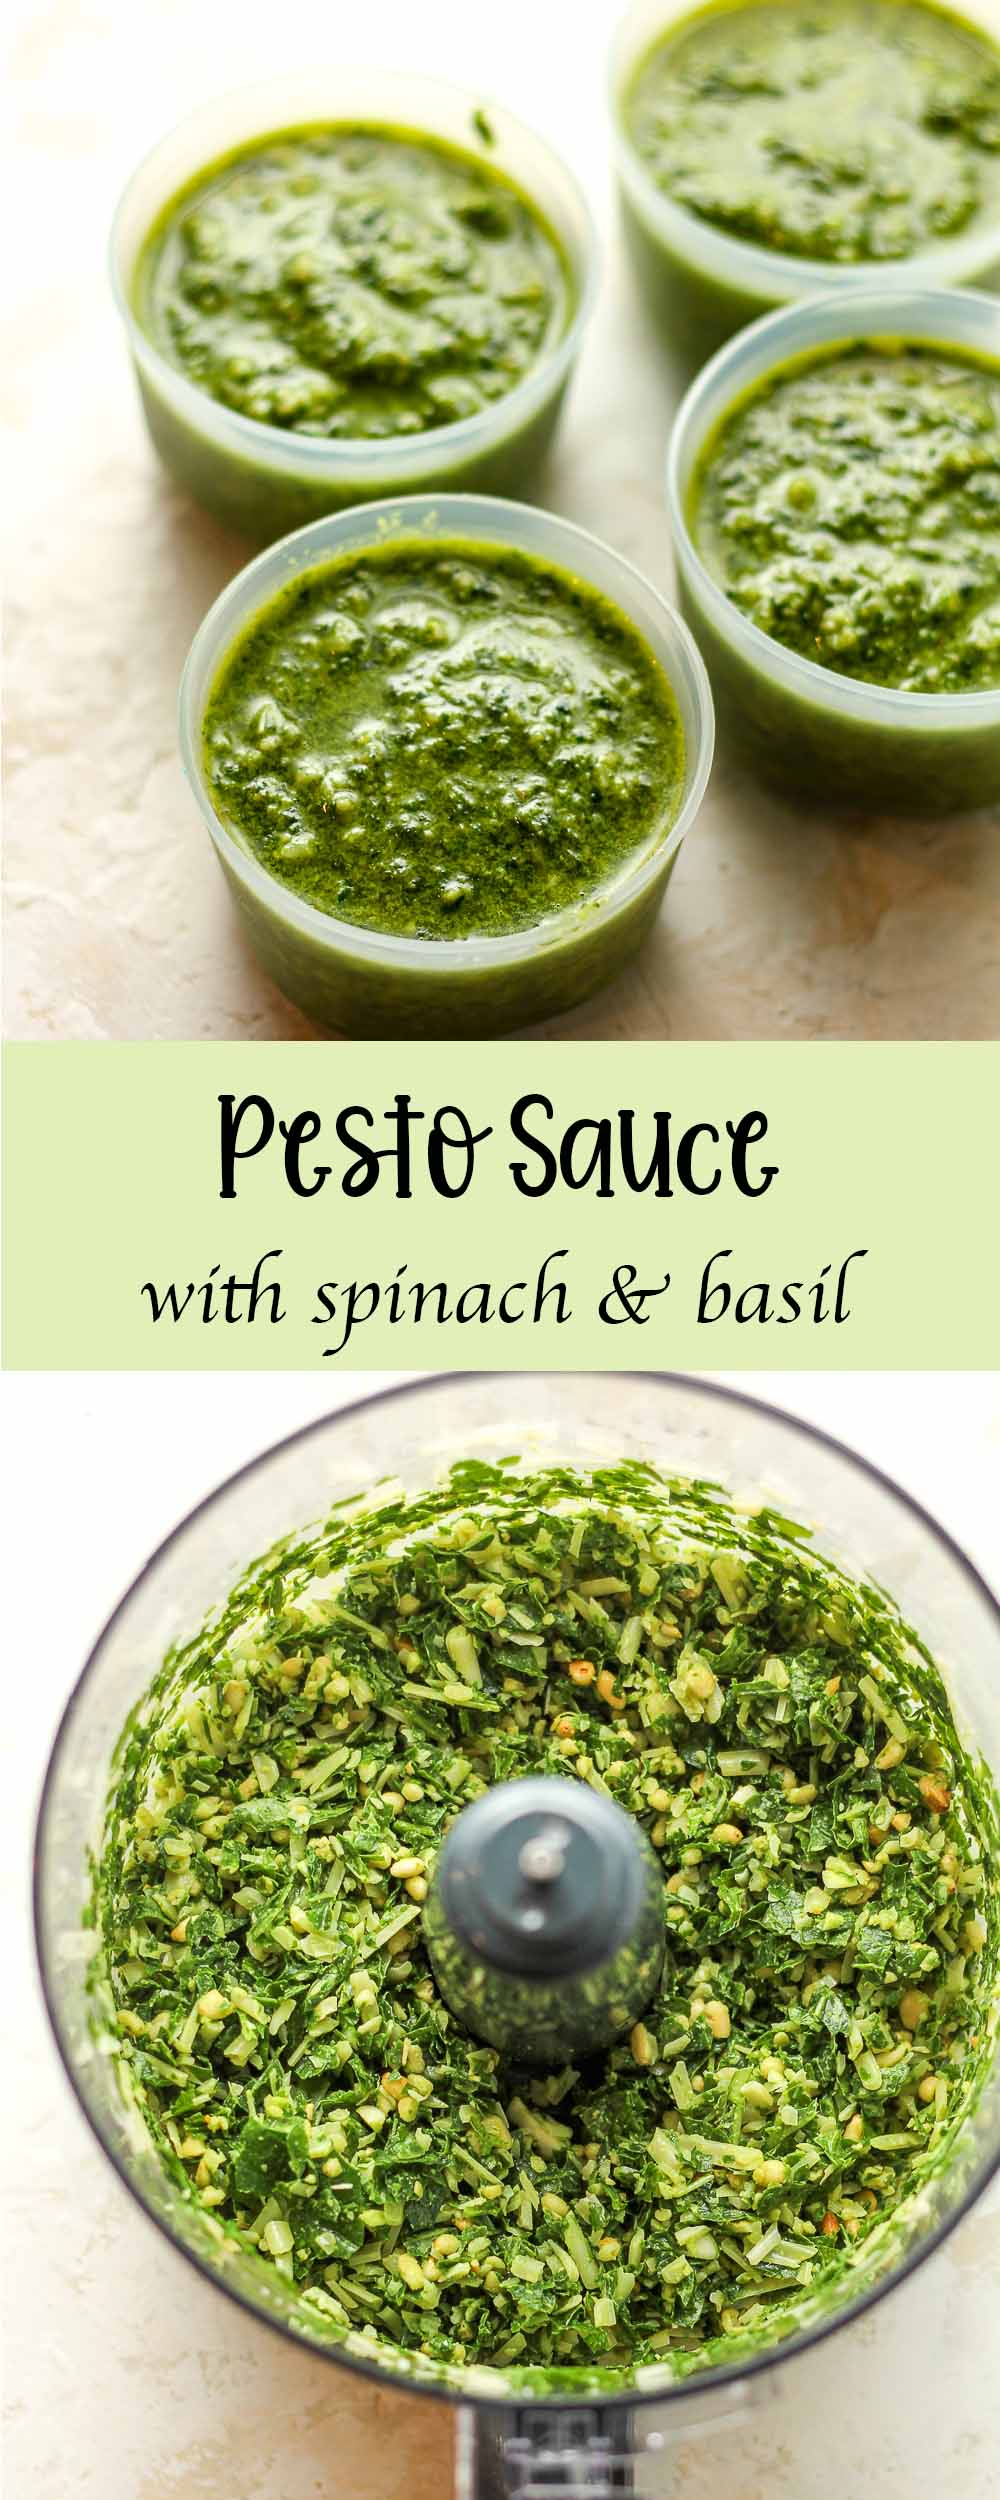 A collage of pesto sauce with spinach and basil.